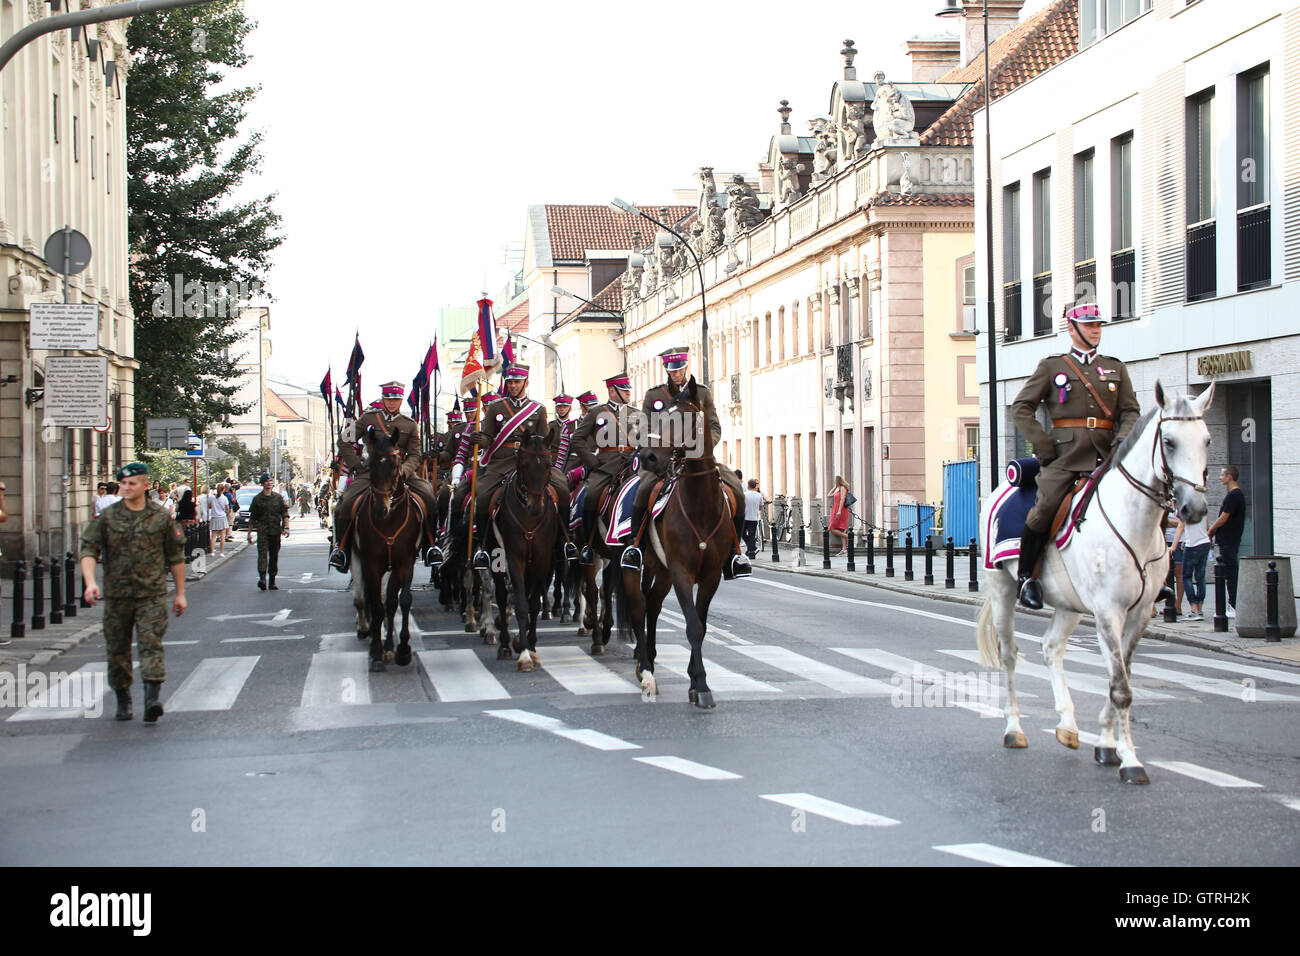 Poland, Warsaw, 10th September 2016: Garrison of Warsaw held cavalry celebration day of the Polish army. A horse collapsed of the hot temperature during the riding parade. Credit:  Jake Ratz/Alamy Live News Stock Photo